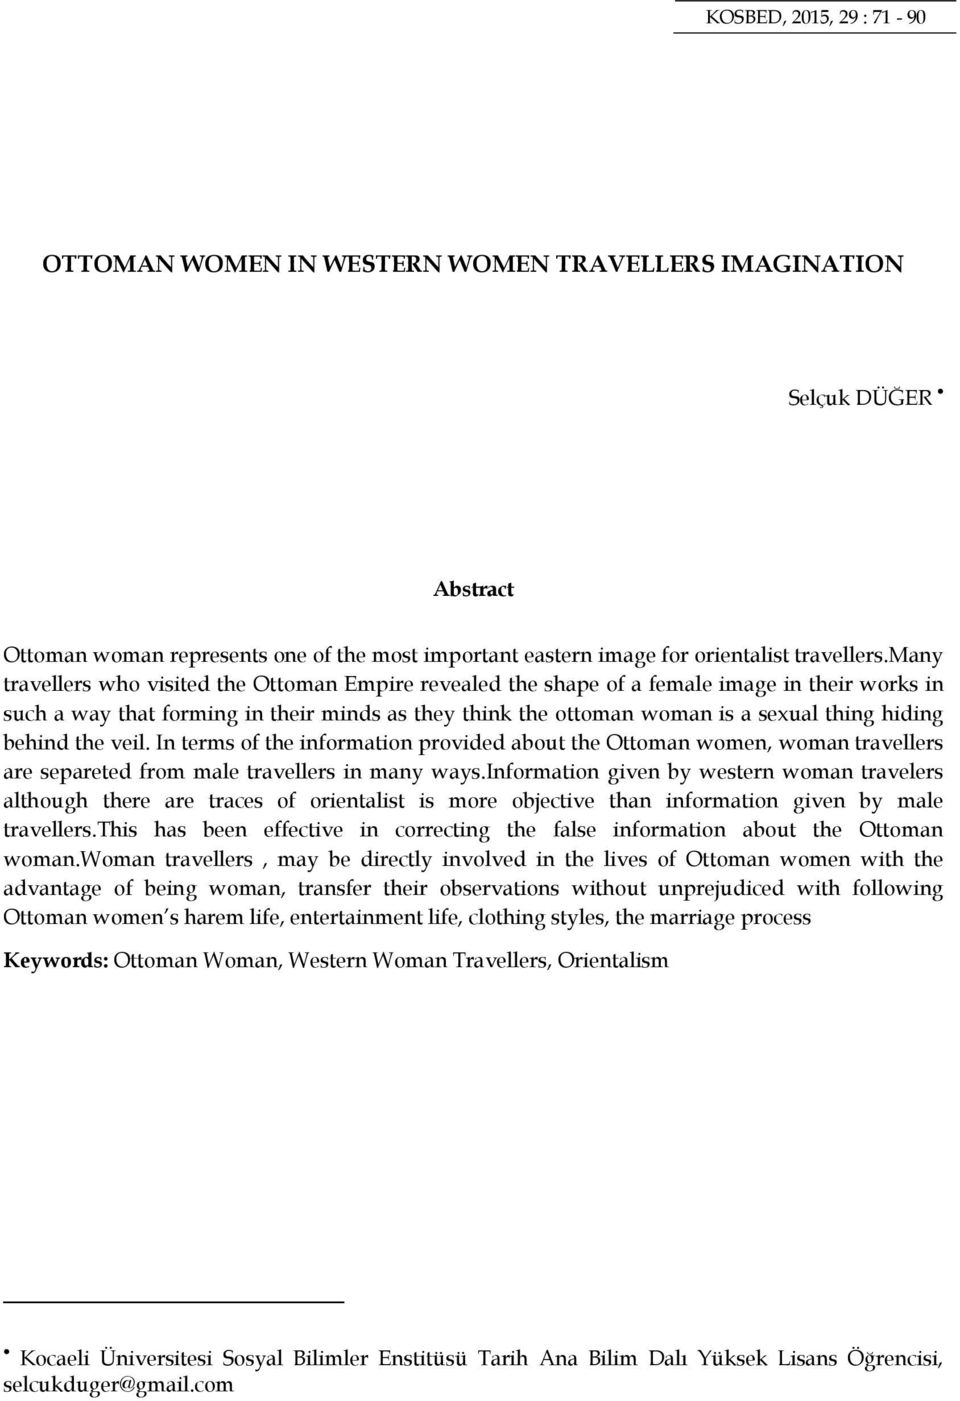 behind the veil. In terms of the information provided about the Ottoman women, woman travellers are separeted from male travellers in many ways.